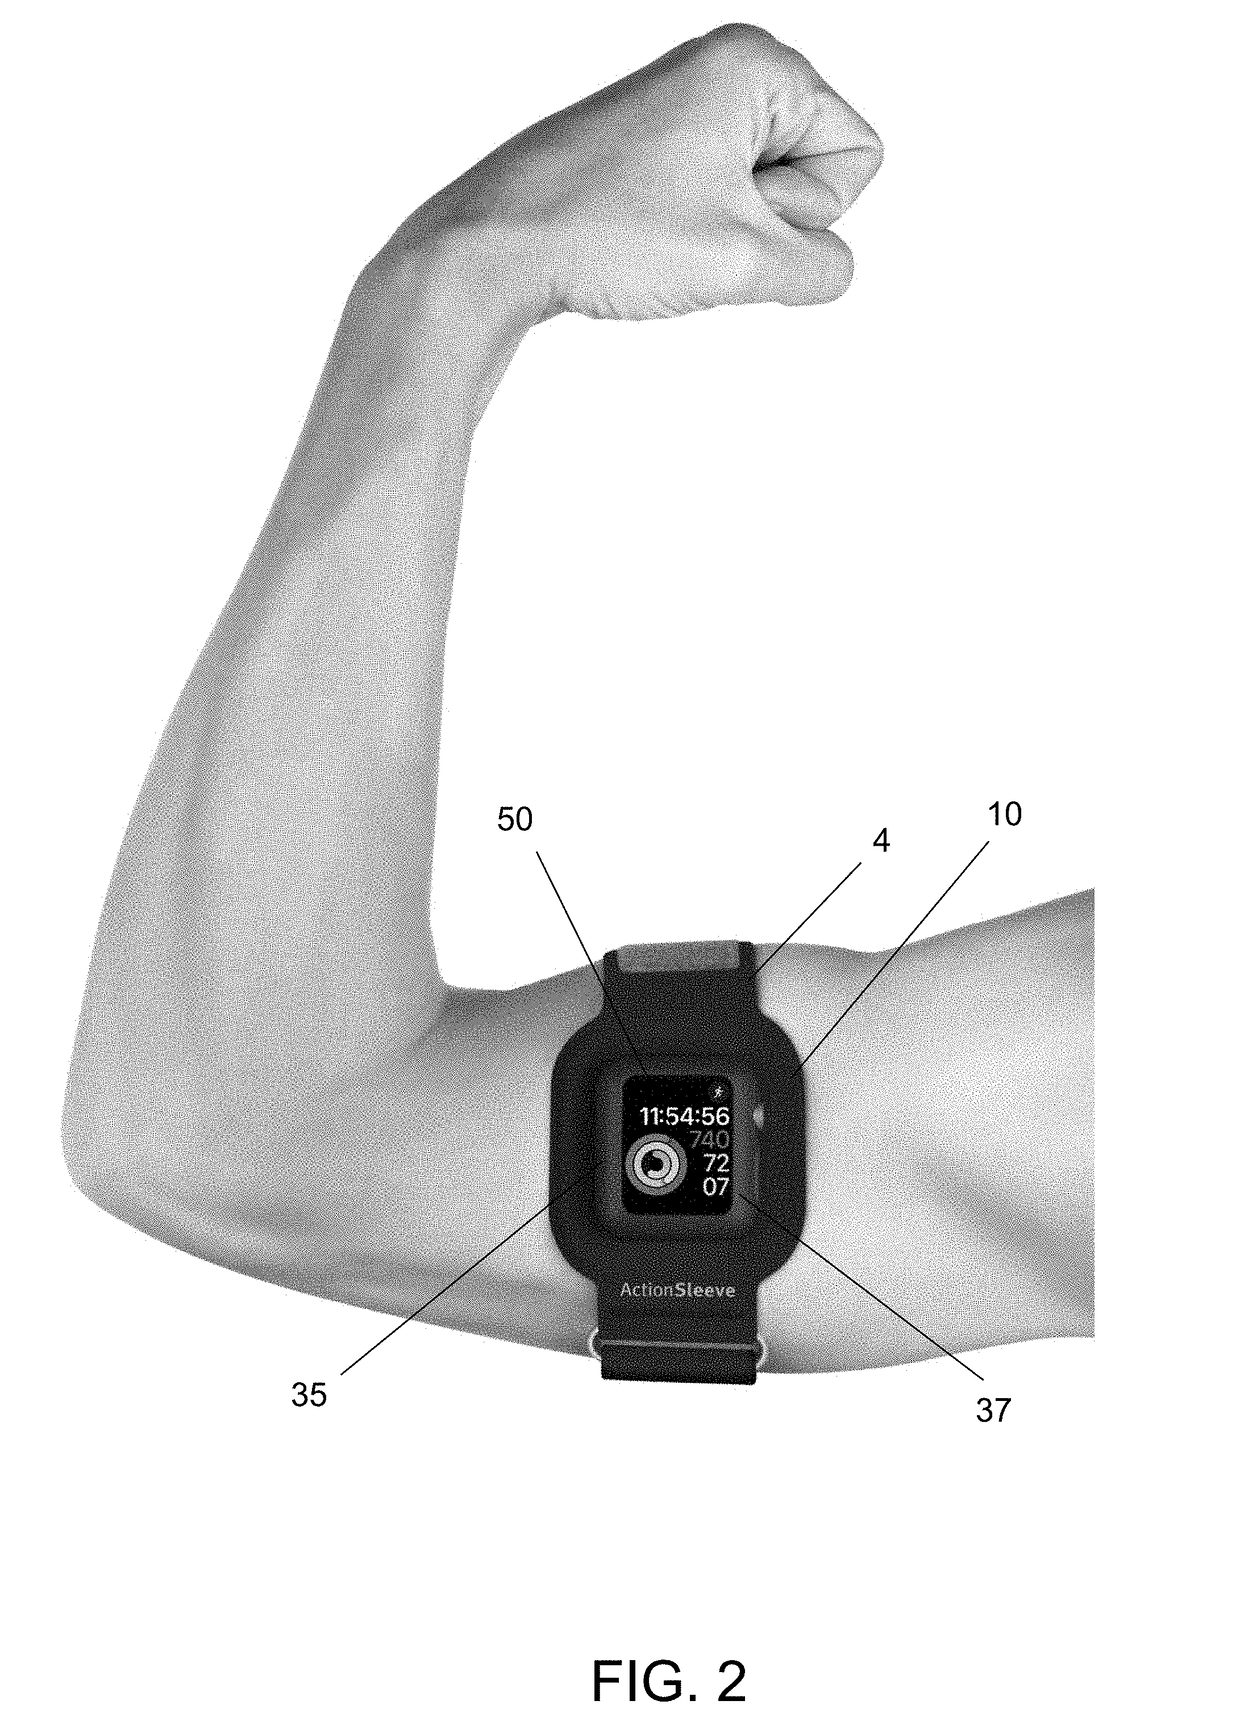 Wearable holder for securing a smart watch